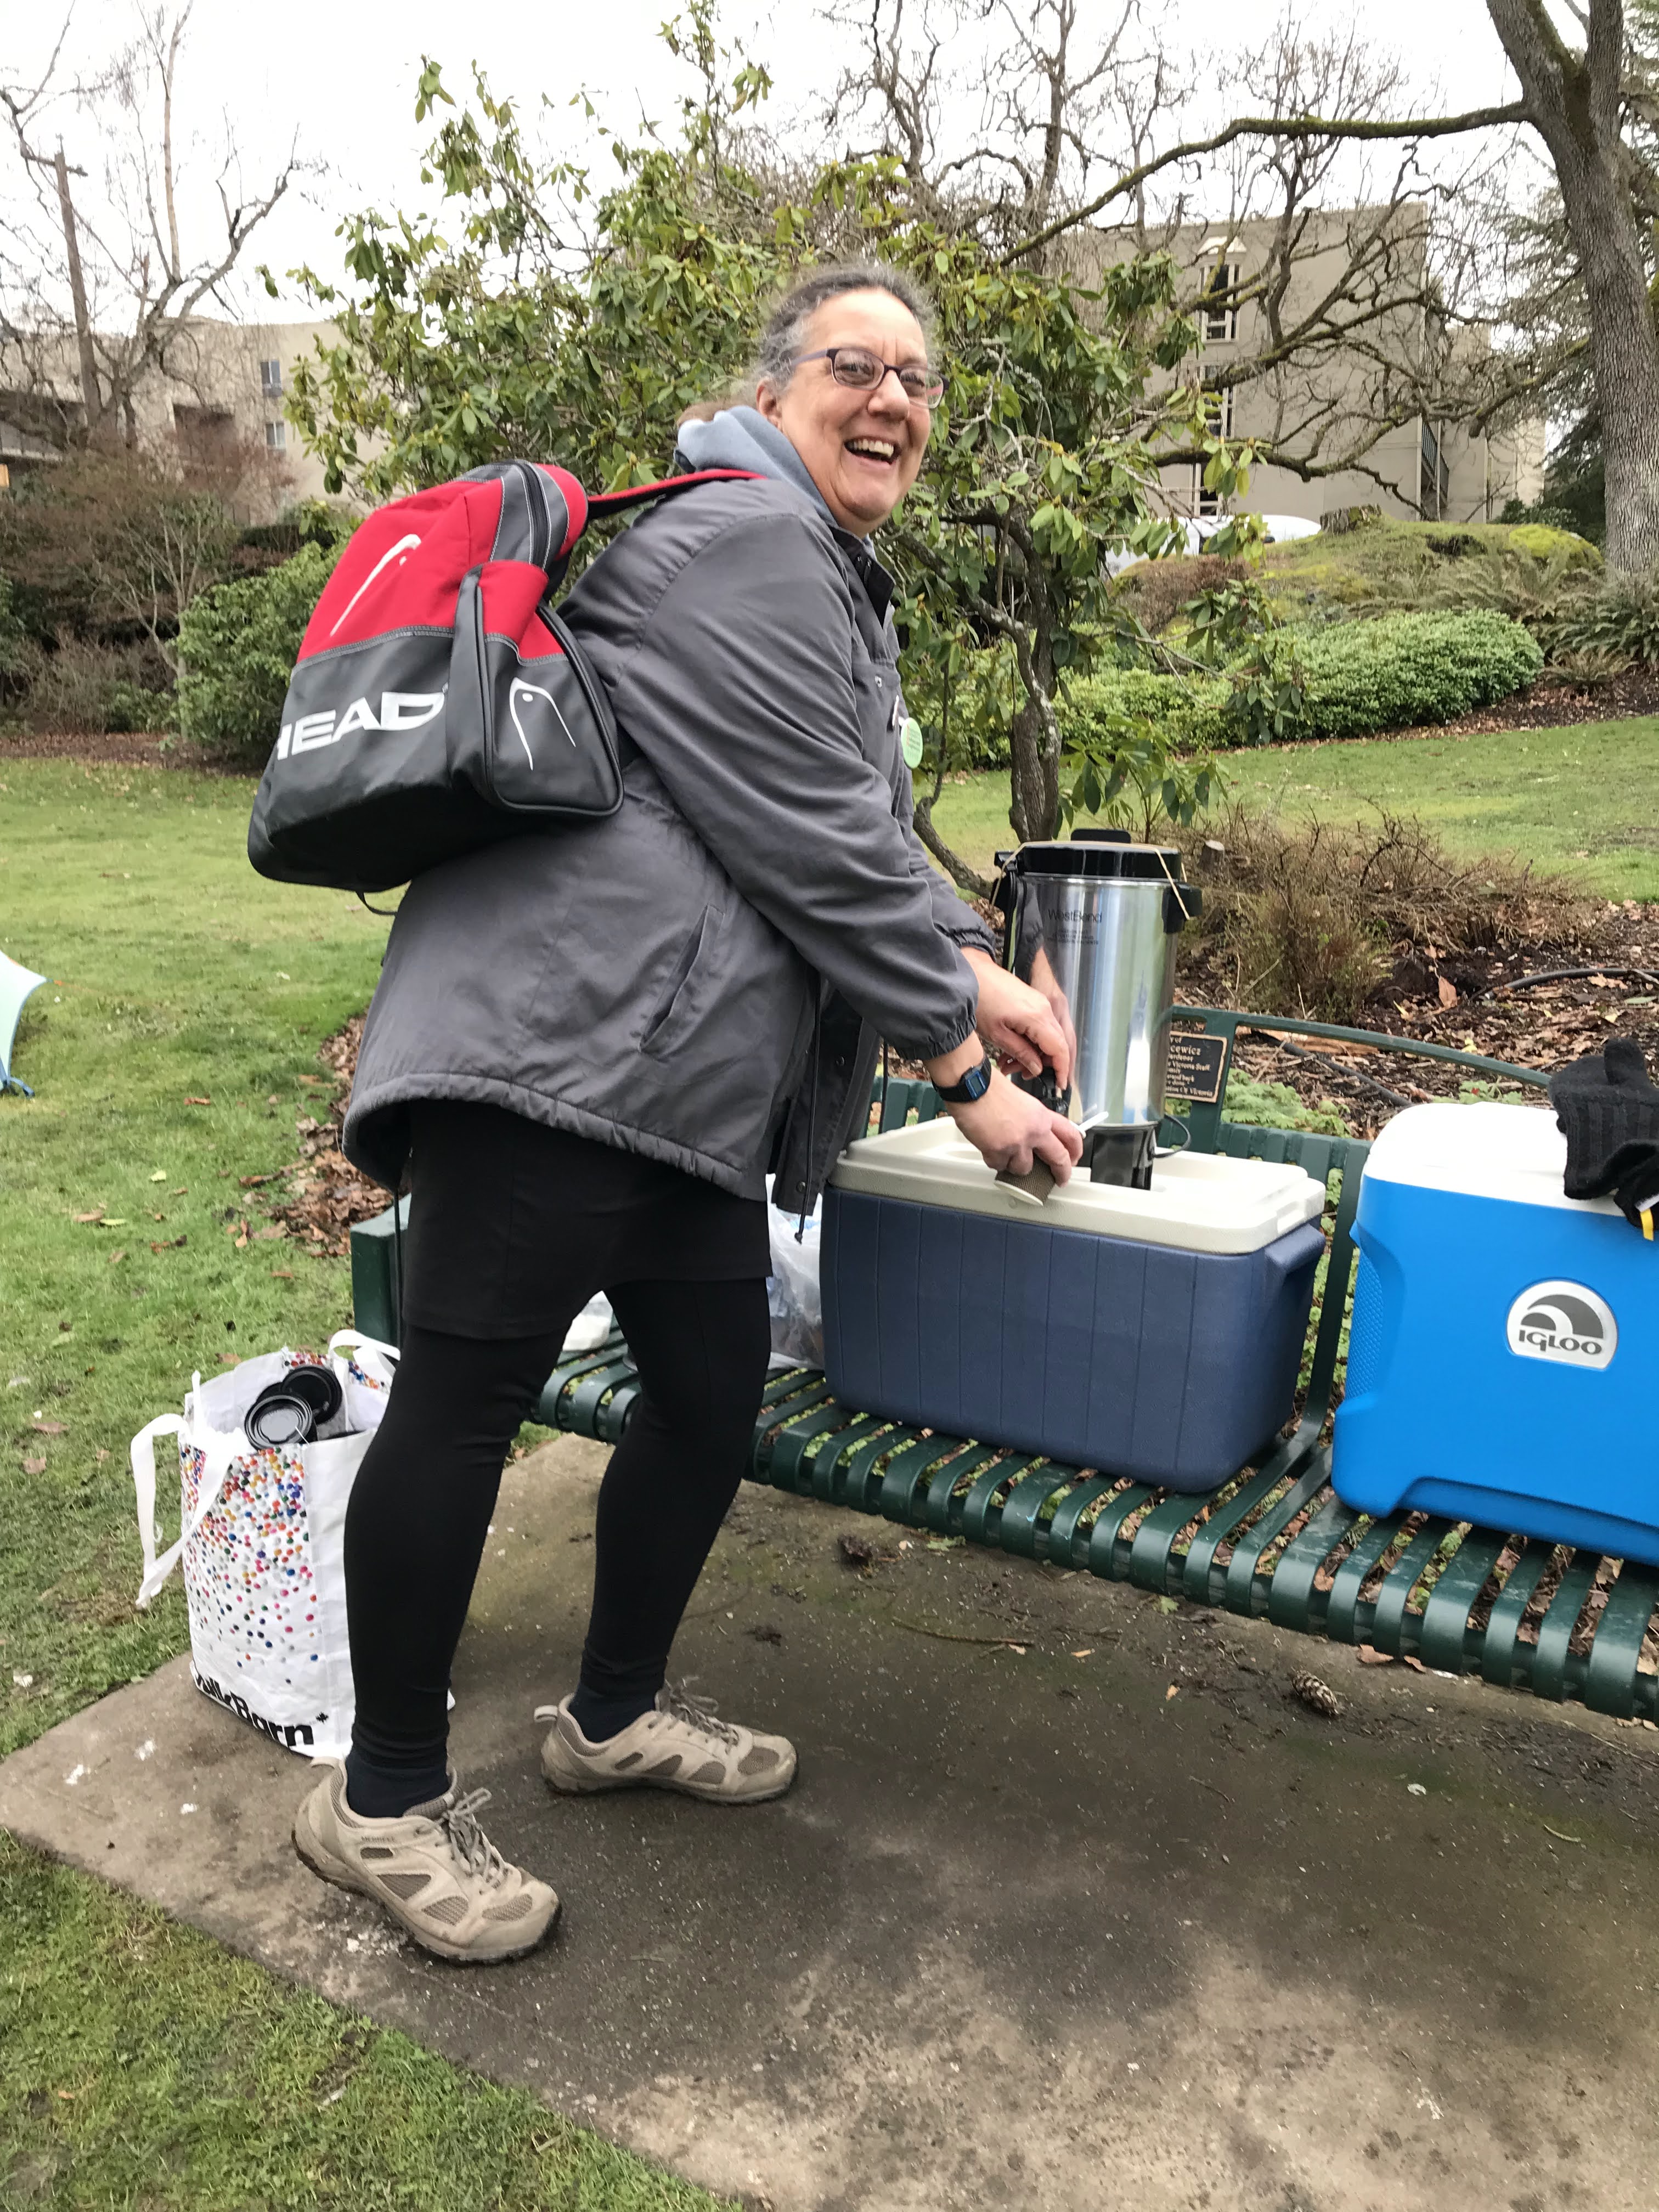 A woman in a rain jacket and backpack dispensing a cup of coffee from an urn in Stadacona Park in Victoria, British Columbia - February 2023